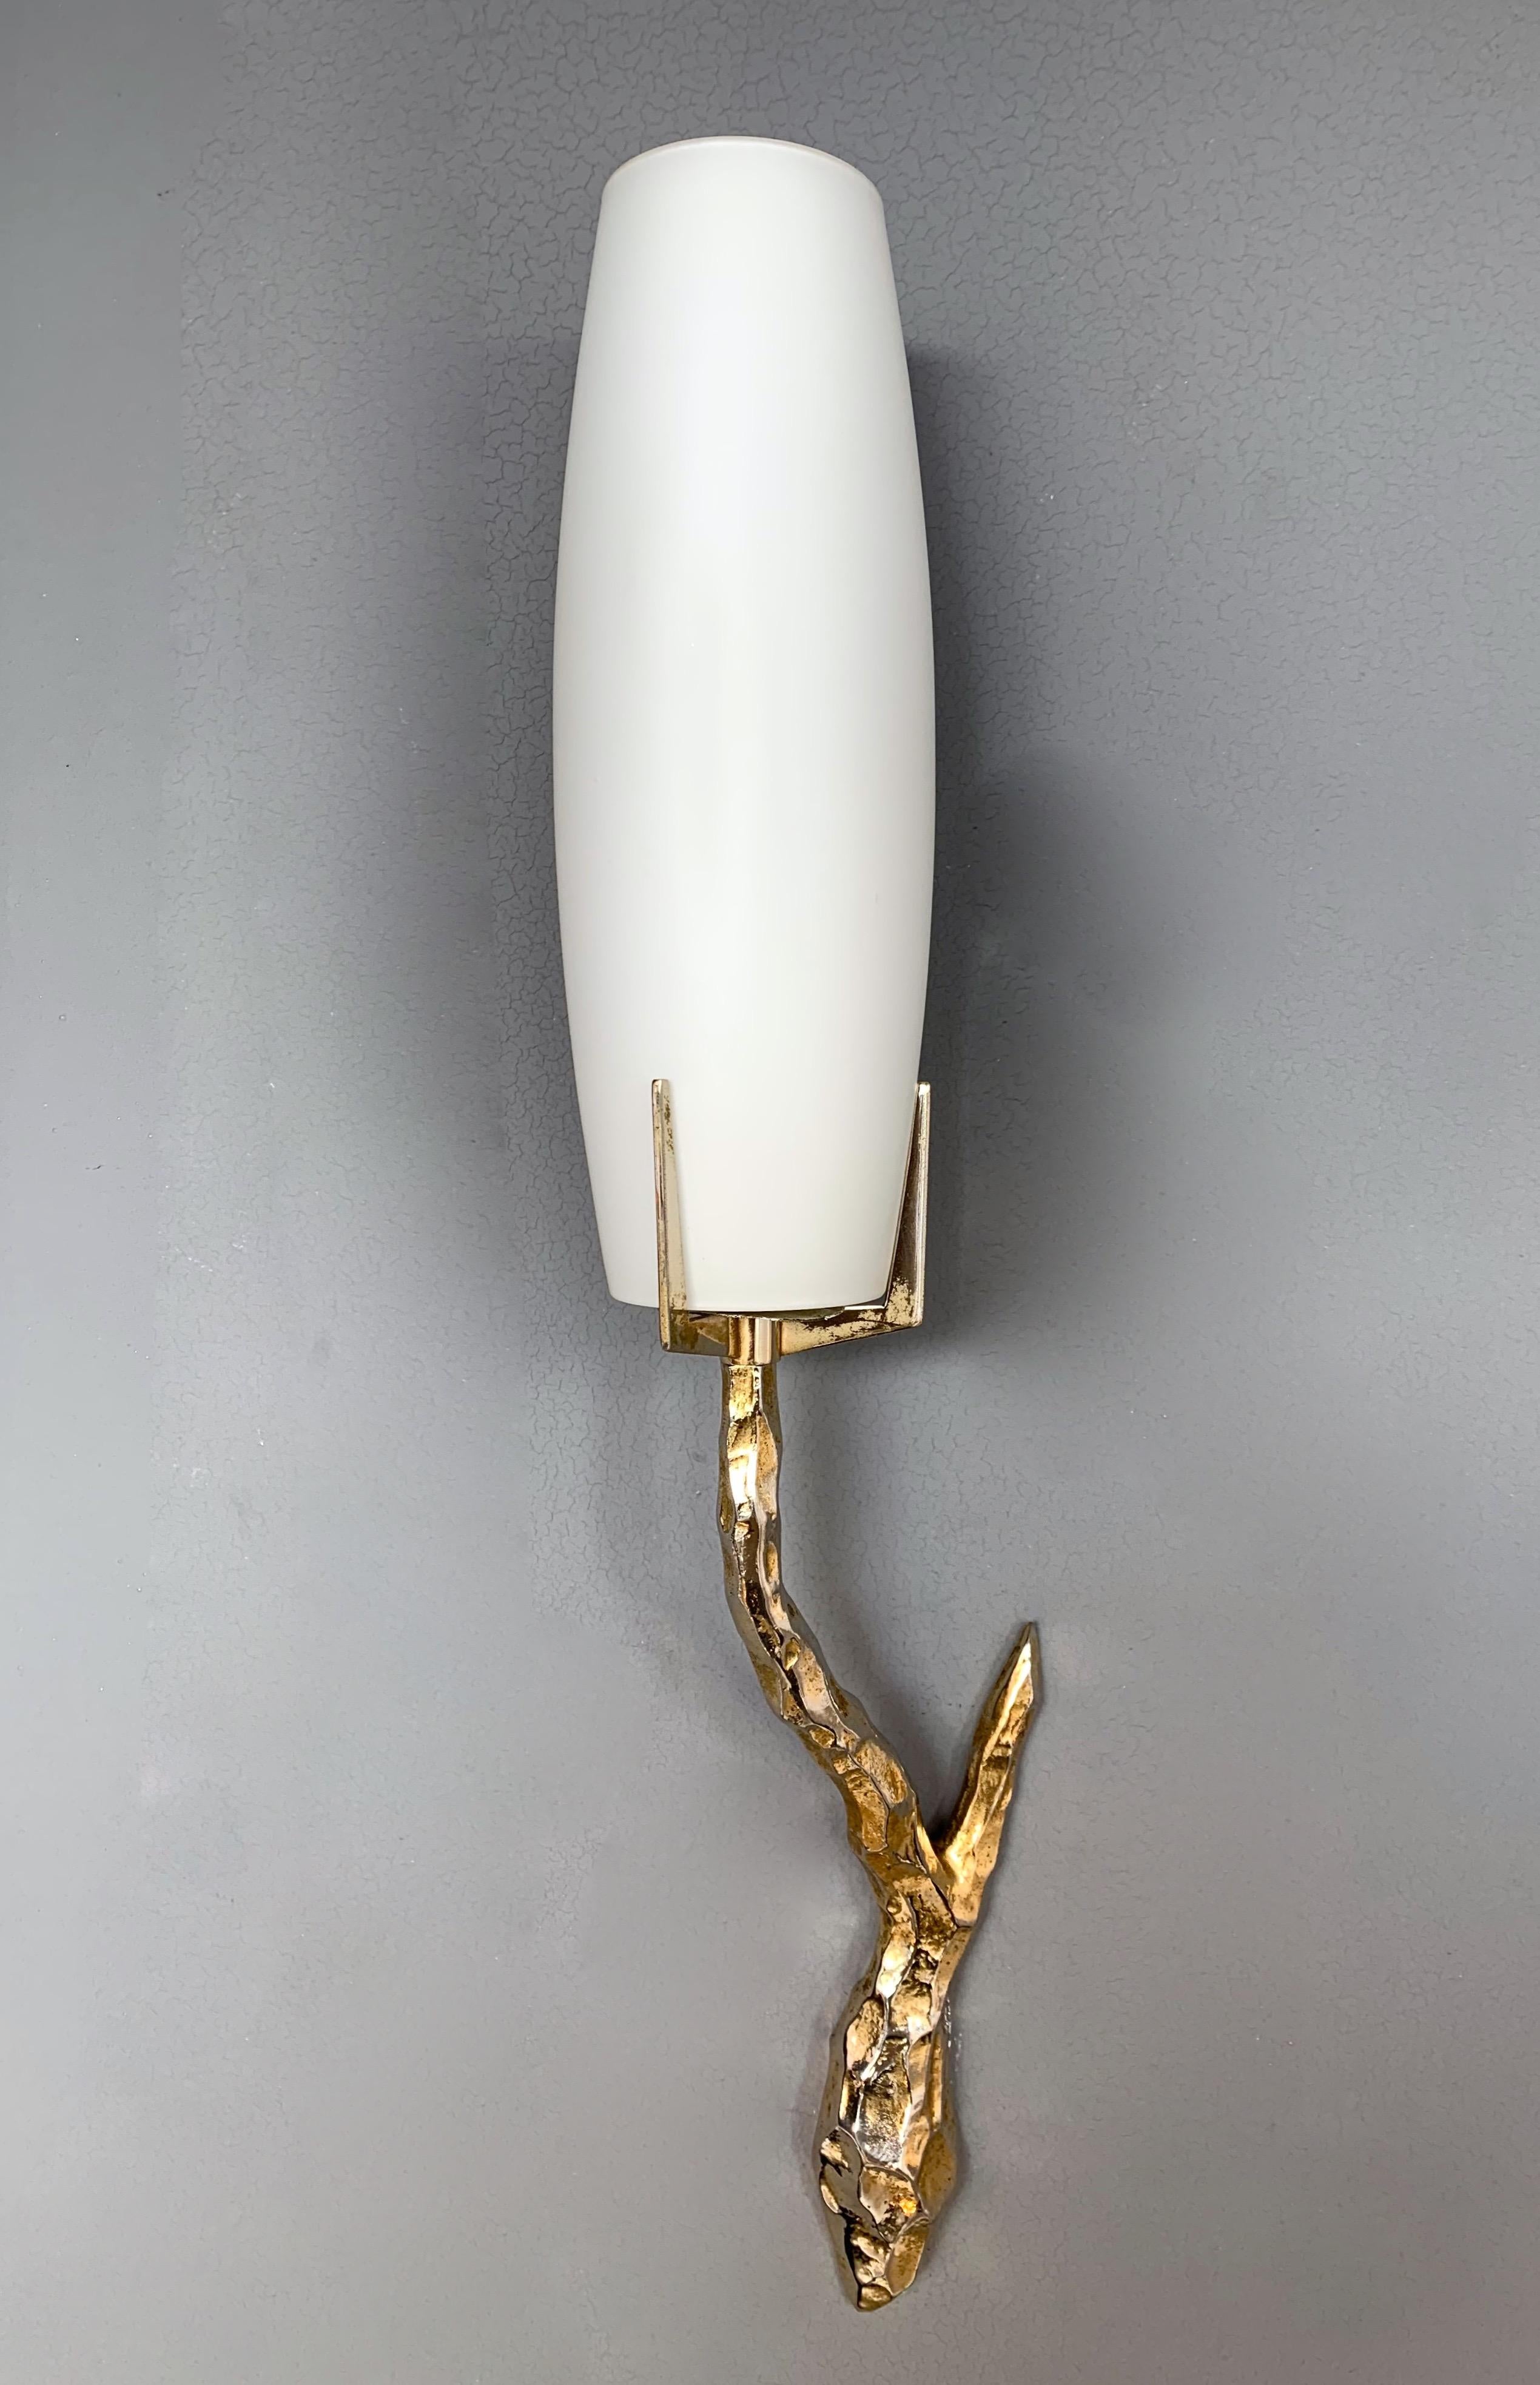 Pair of wall lights sconces cast gilt bronze and opaline glass diffusor by Maison Arlus, very interesting and sculptural model based on Felix Agostini drawing for the manufacture. On request original Arlus advertising from the 1960s. It’s a famous